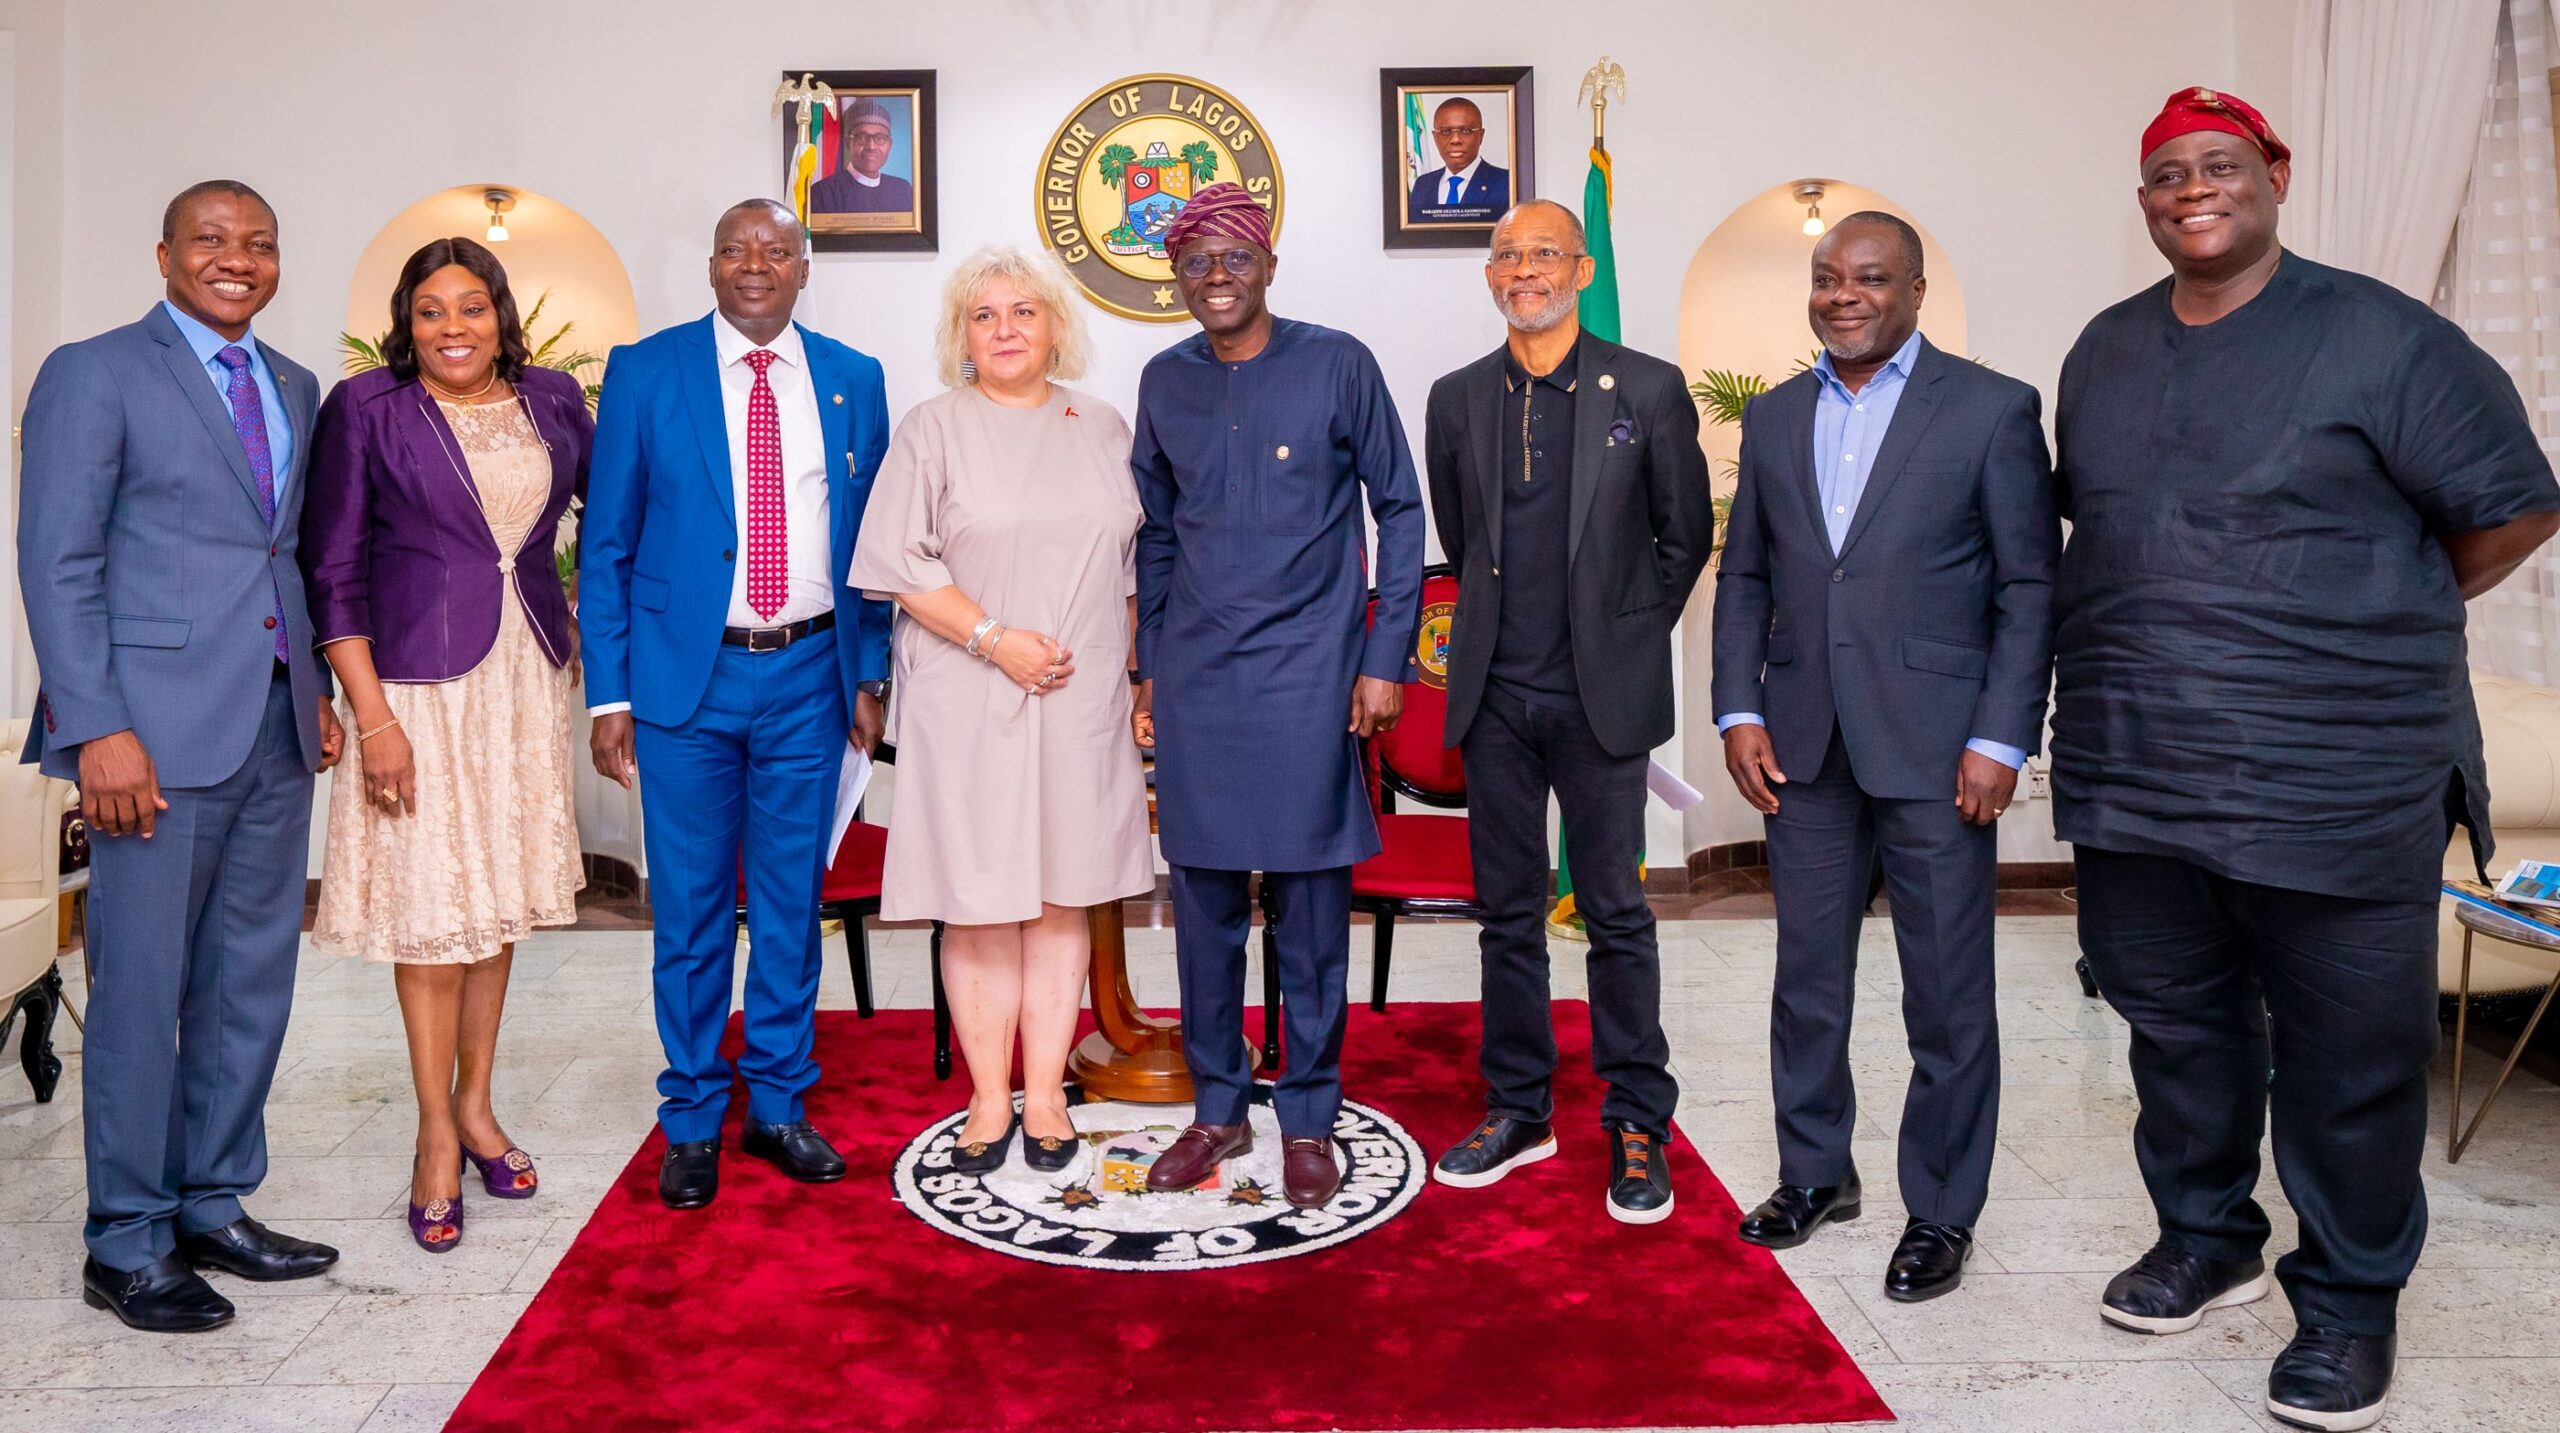 Photos: Gov. Sanwo-Olu Attends Dinner, Meets High-Level Mission ‘Stop TB Partnership’ GenevaTeam, In Lagos